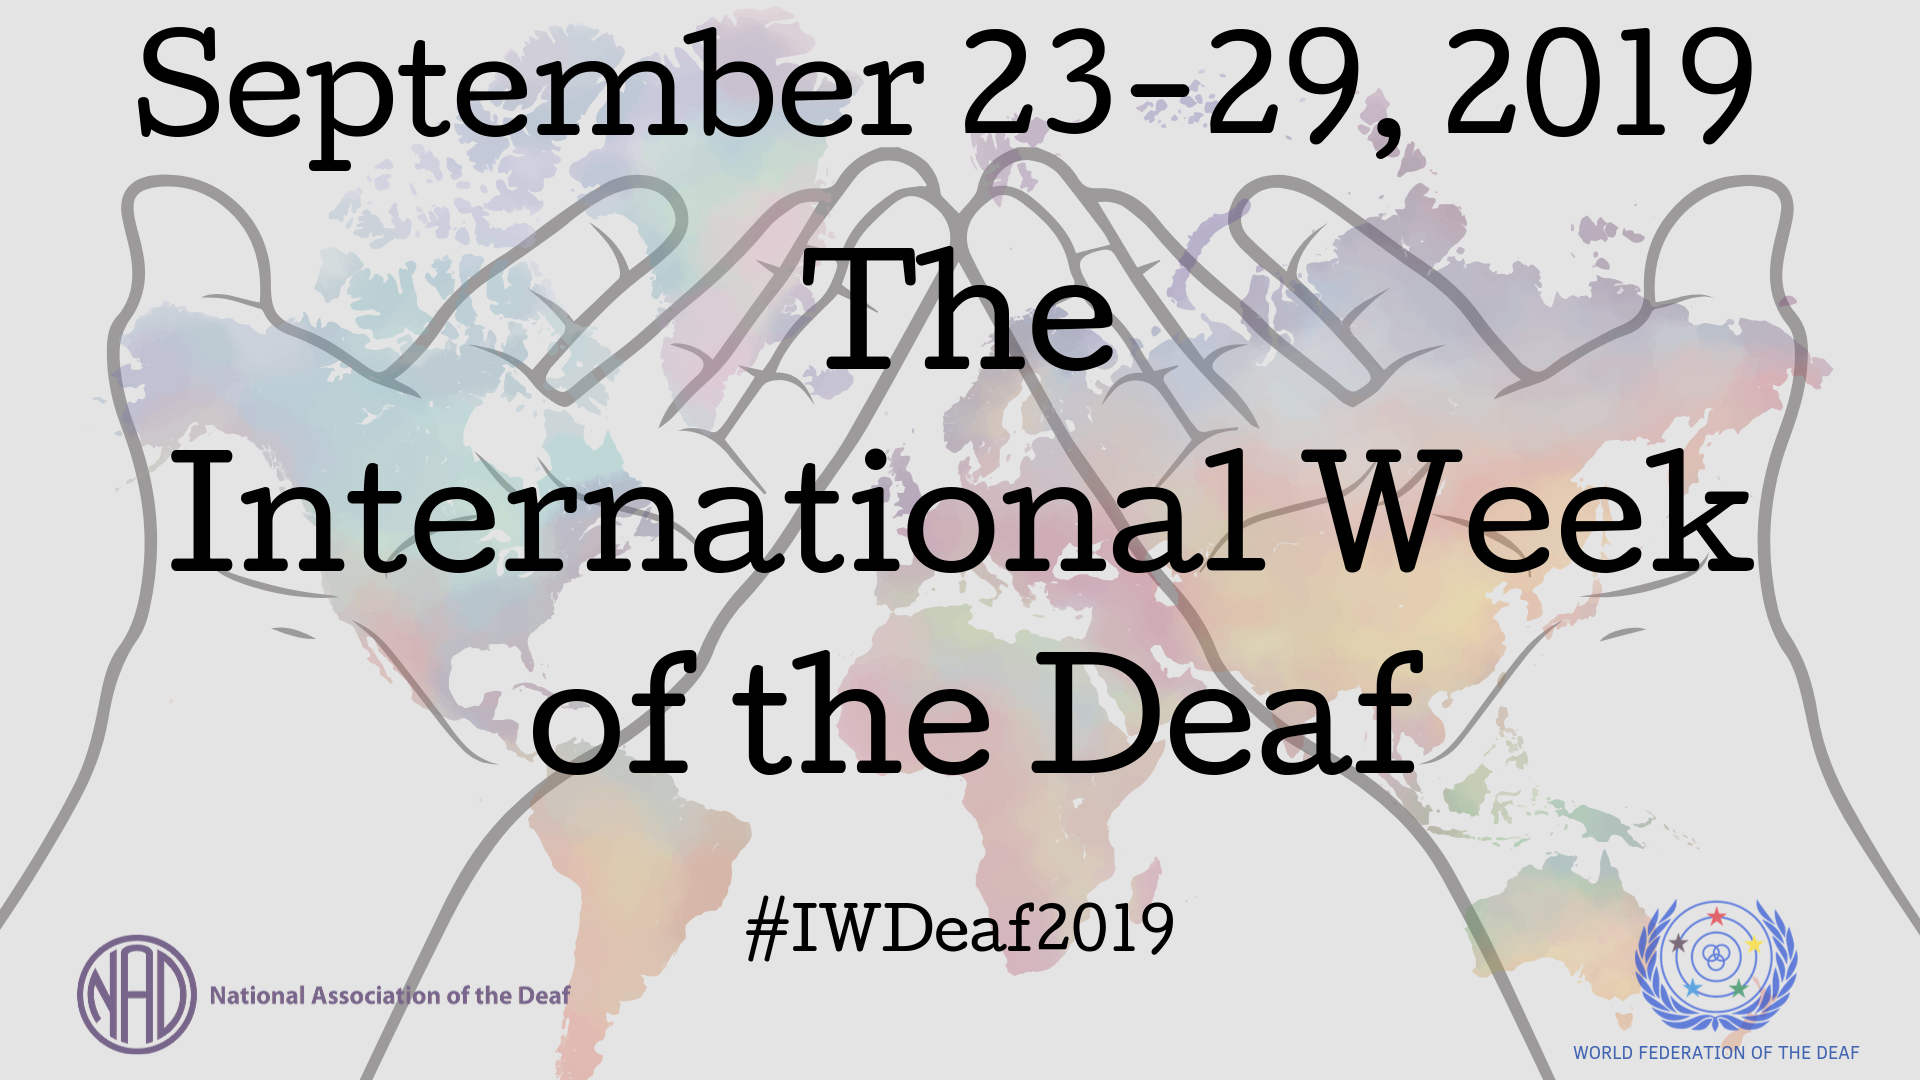 September 23 through 29, 2019 The International Week of the Deaf #IWDeaf2019 National Association of the Deaf World Federation of the Deaf